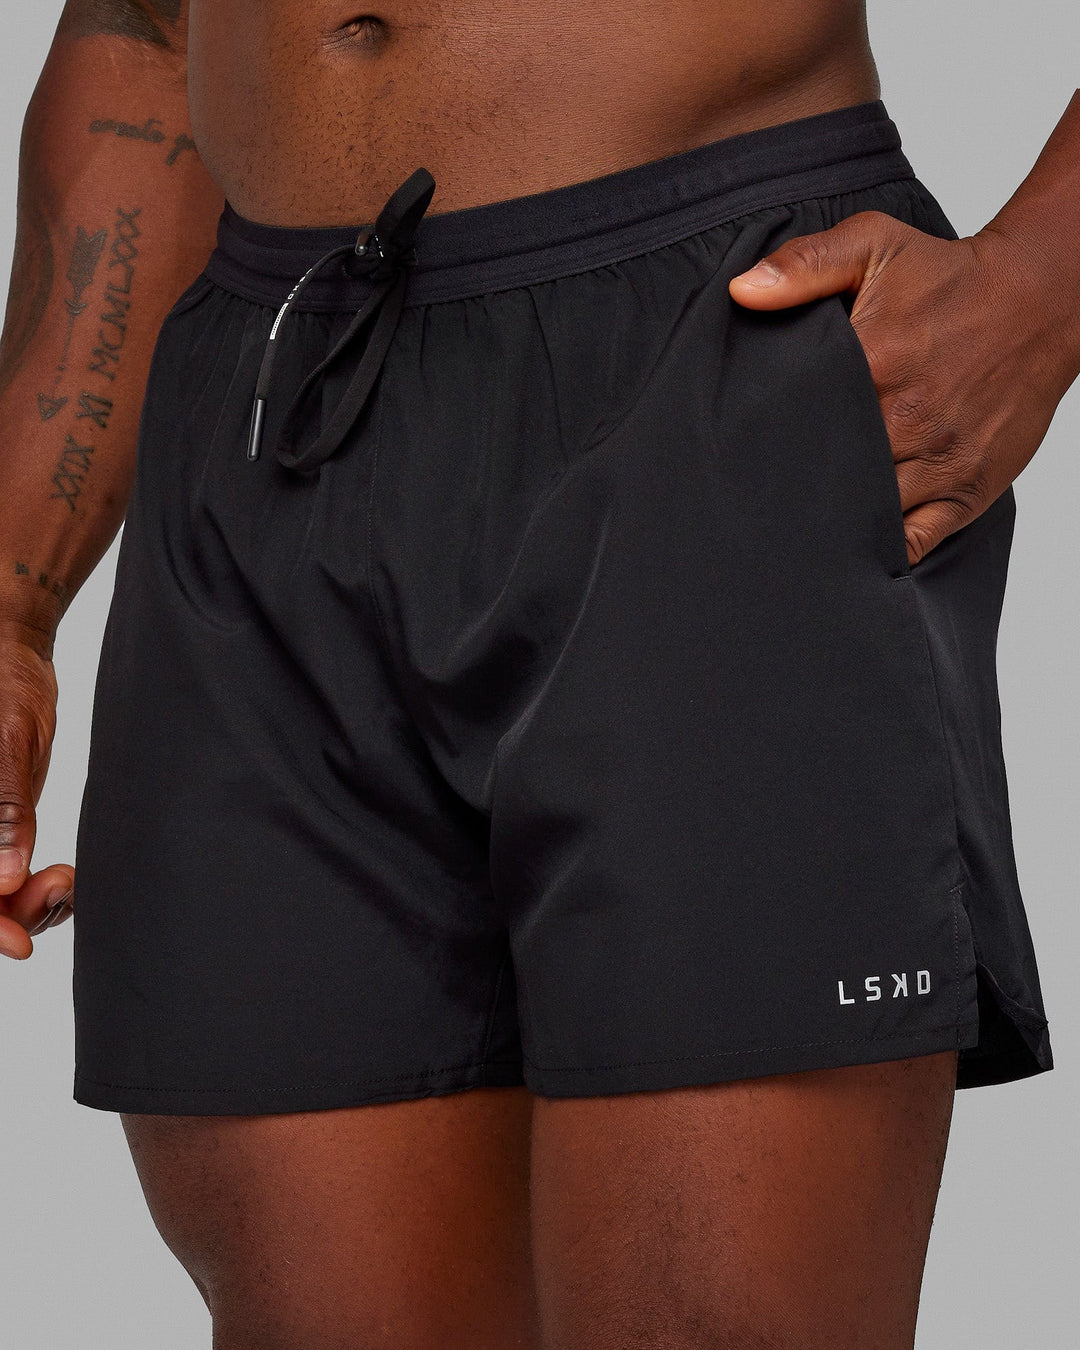 Pace 5" Lined Performance Shorts - Black-Reflective